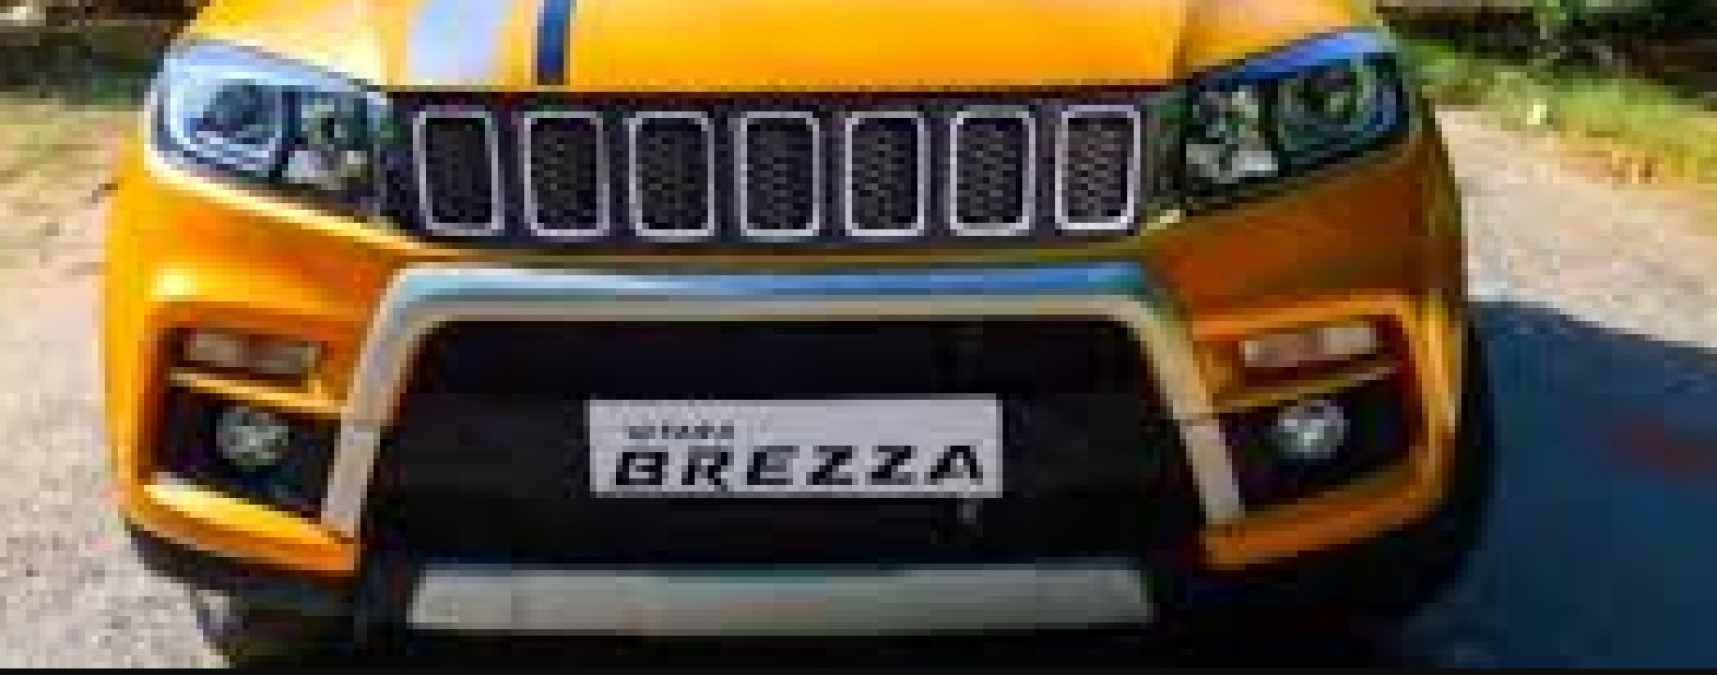 Maruti's Vitara Breeza will be launched in December with this major change